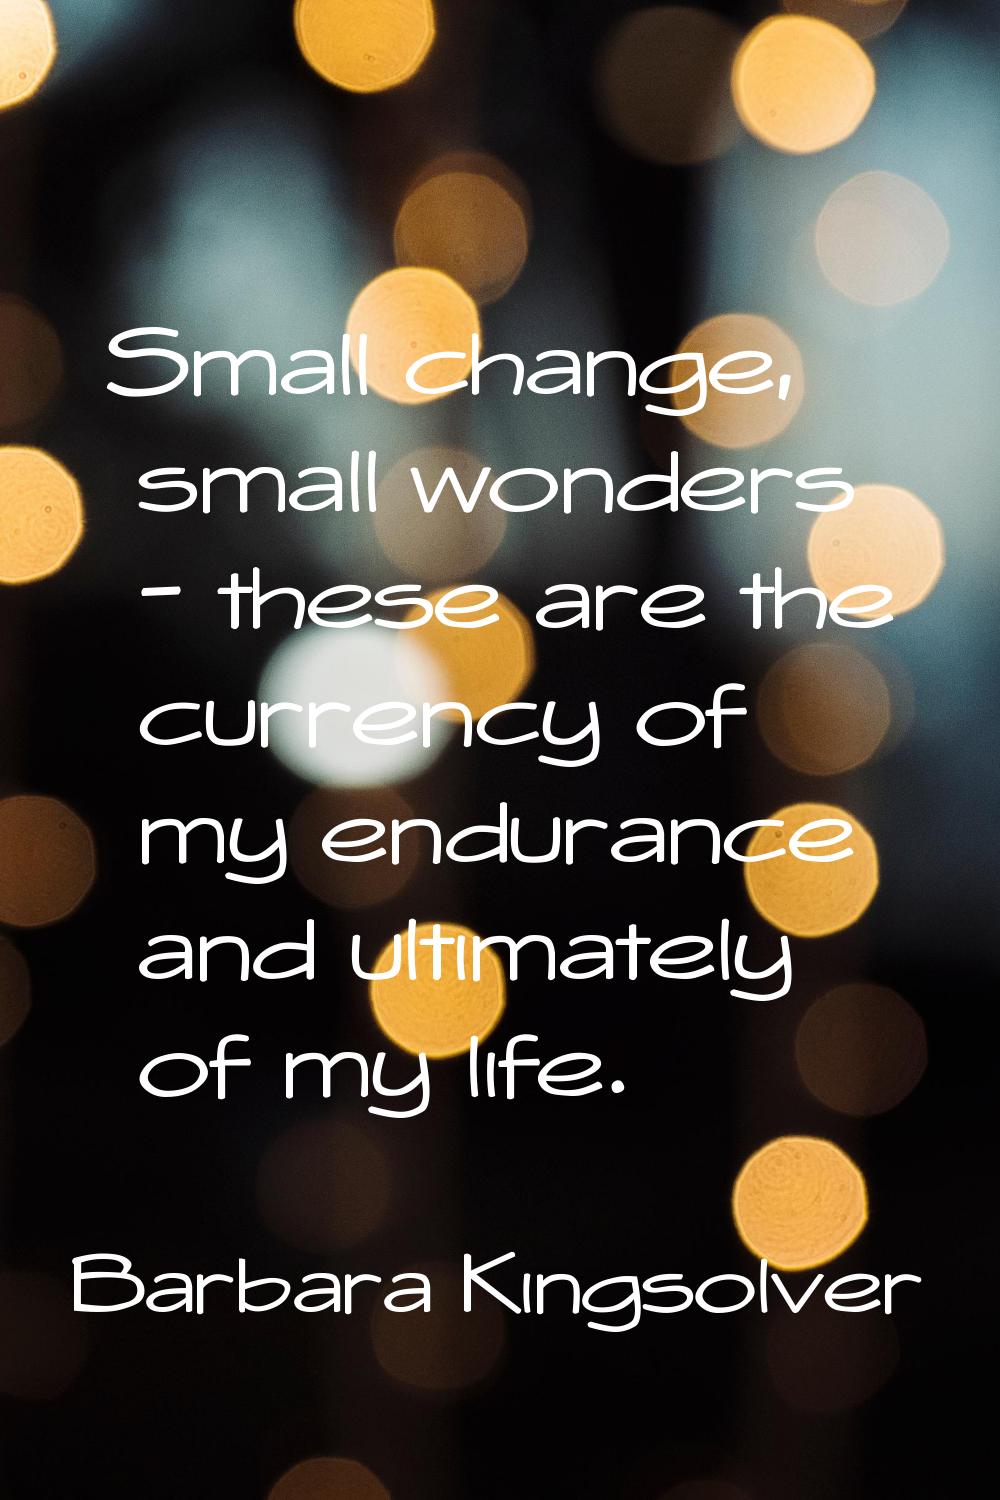 Small change, small wonders - these are the currency of my endurance and ultimately of my life.